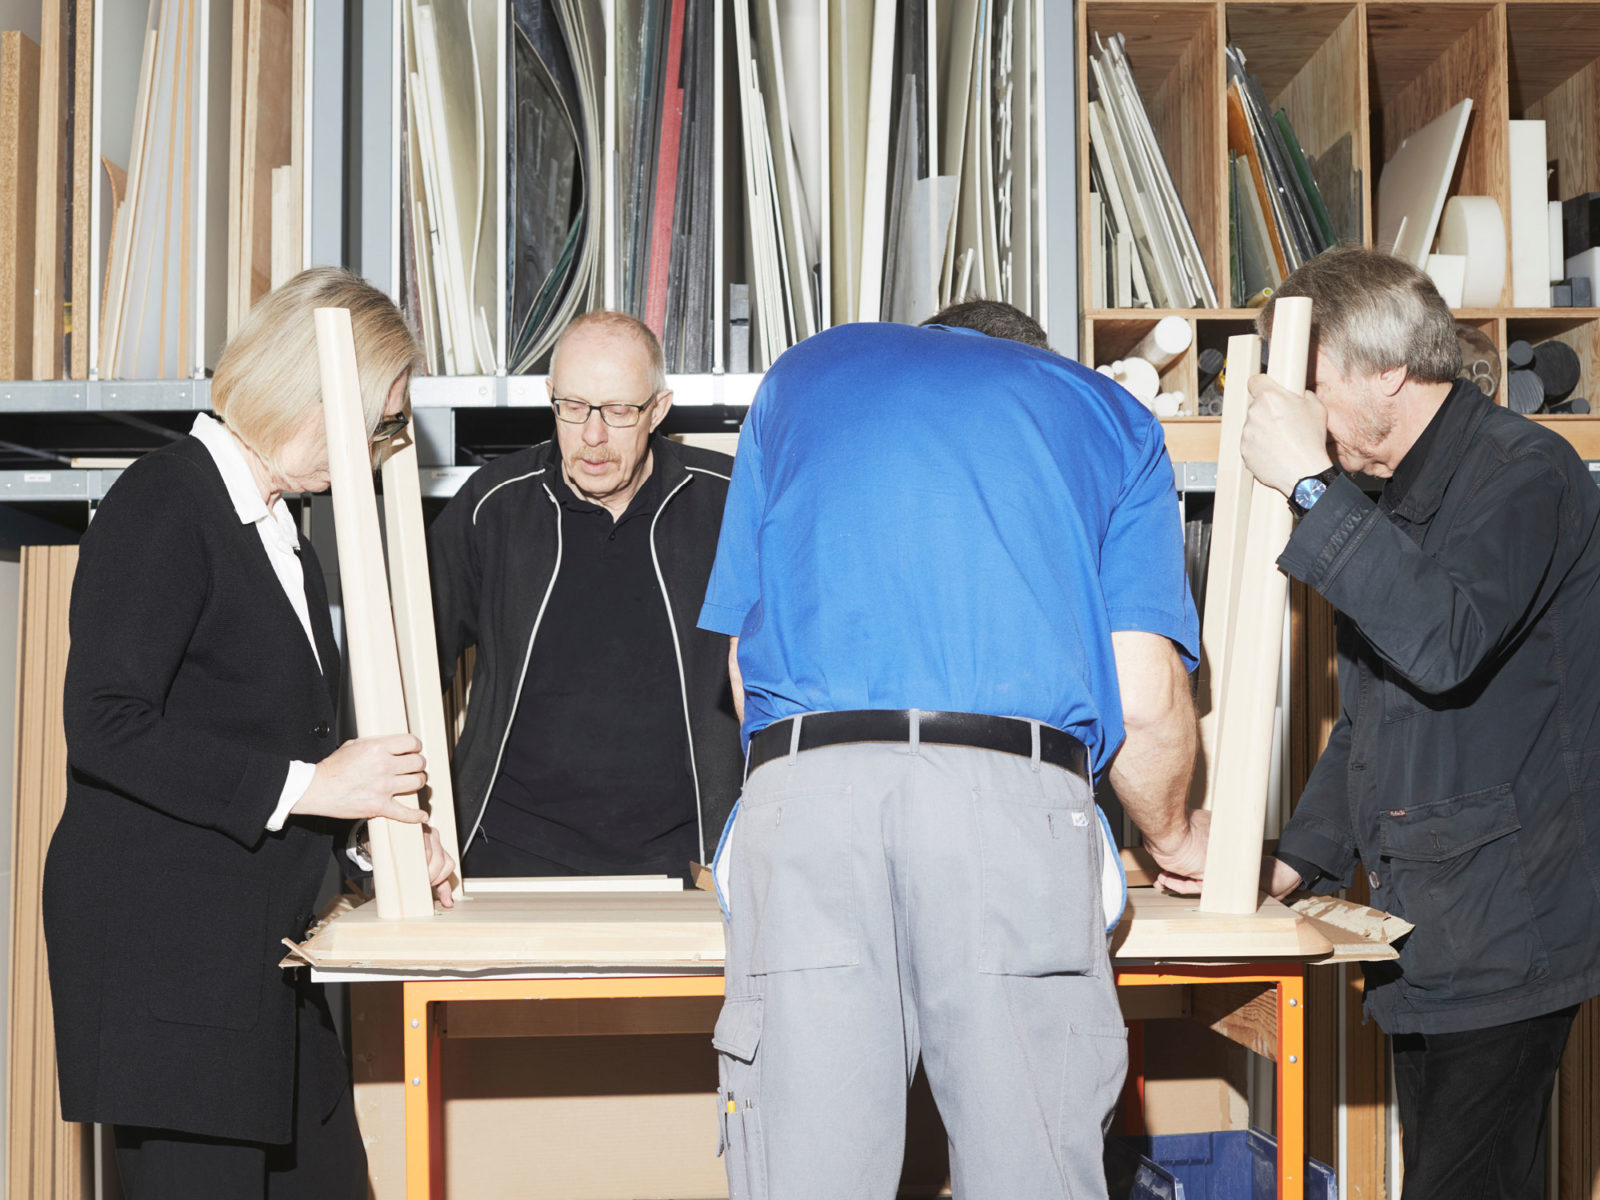 Four middle-aged persons, one woman, three men, working together on a table turned upside down.